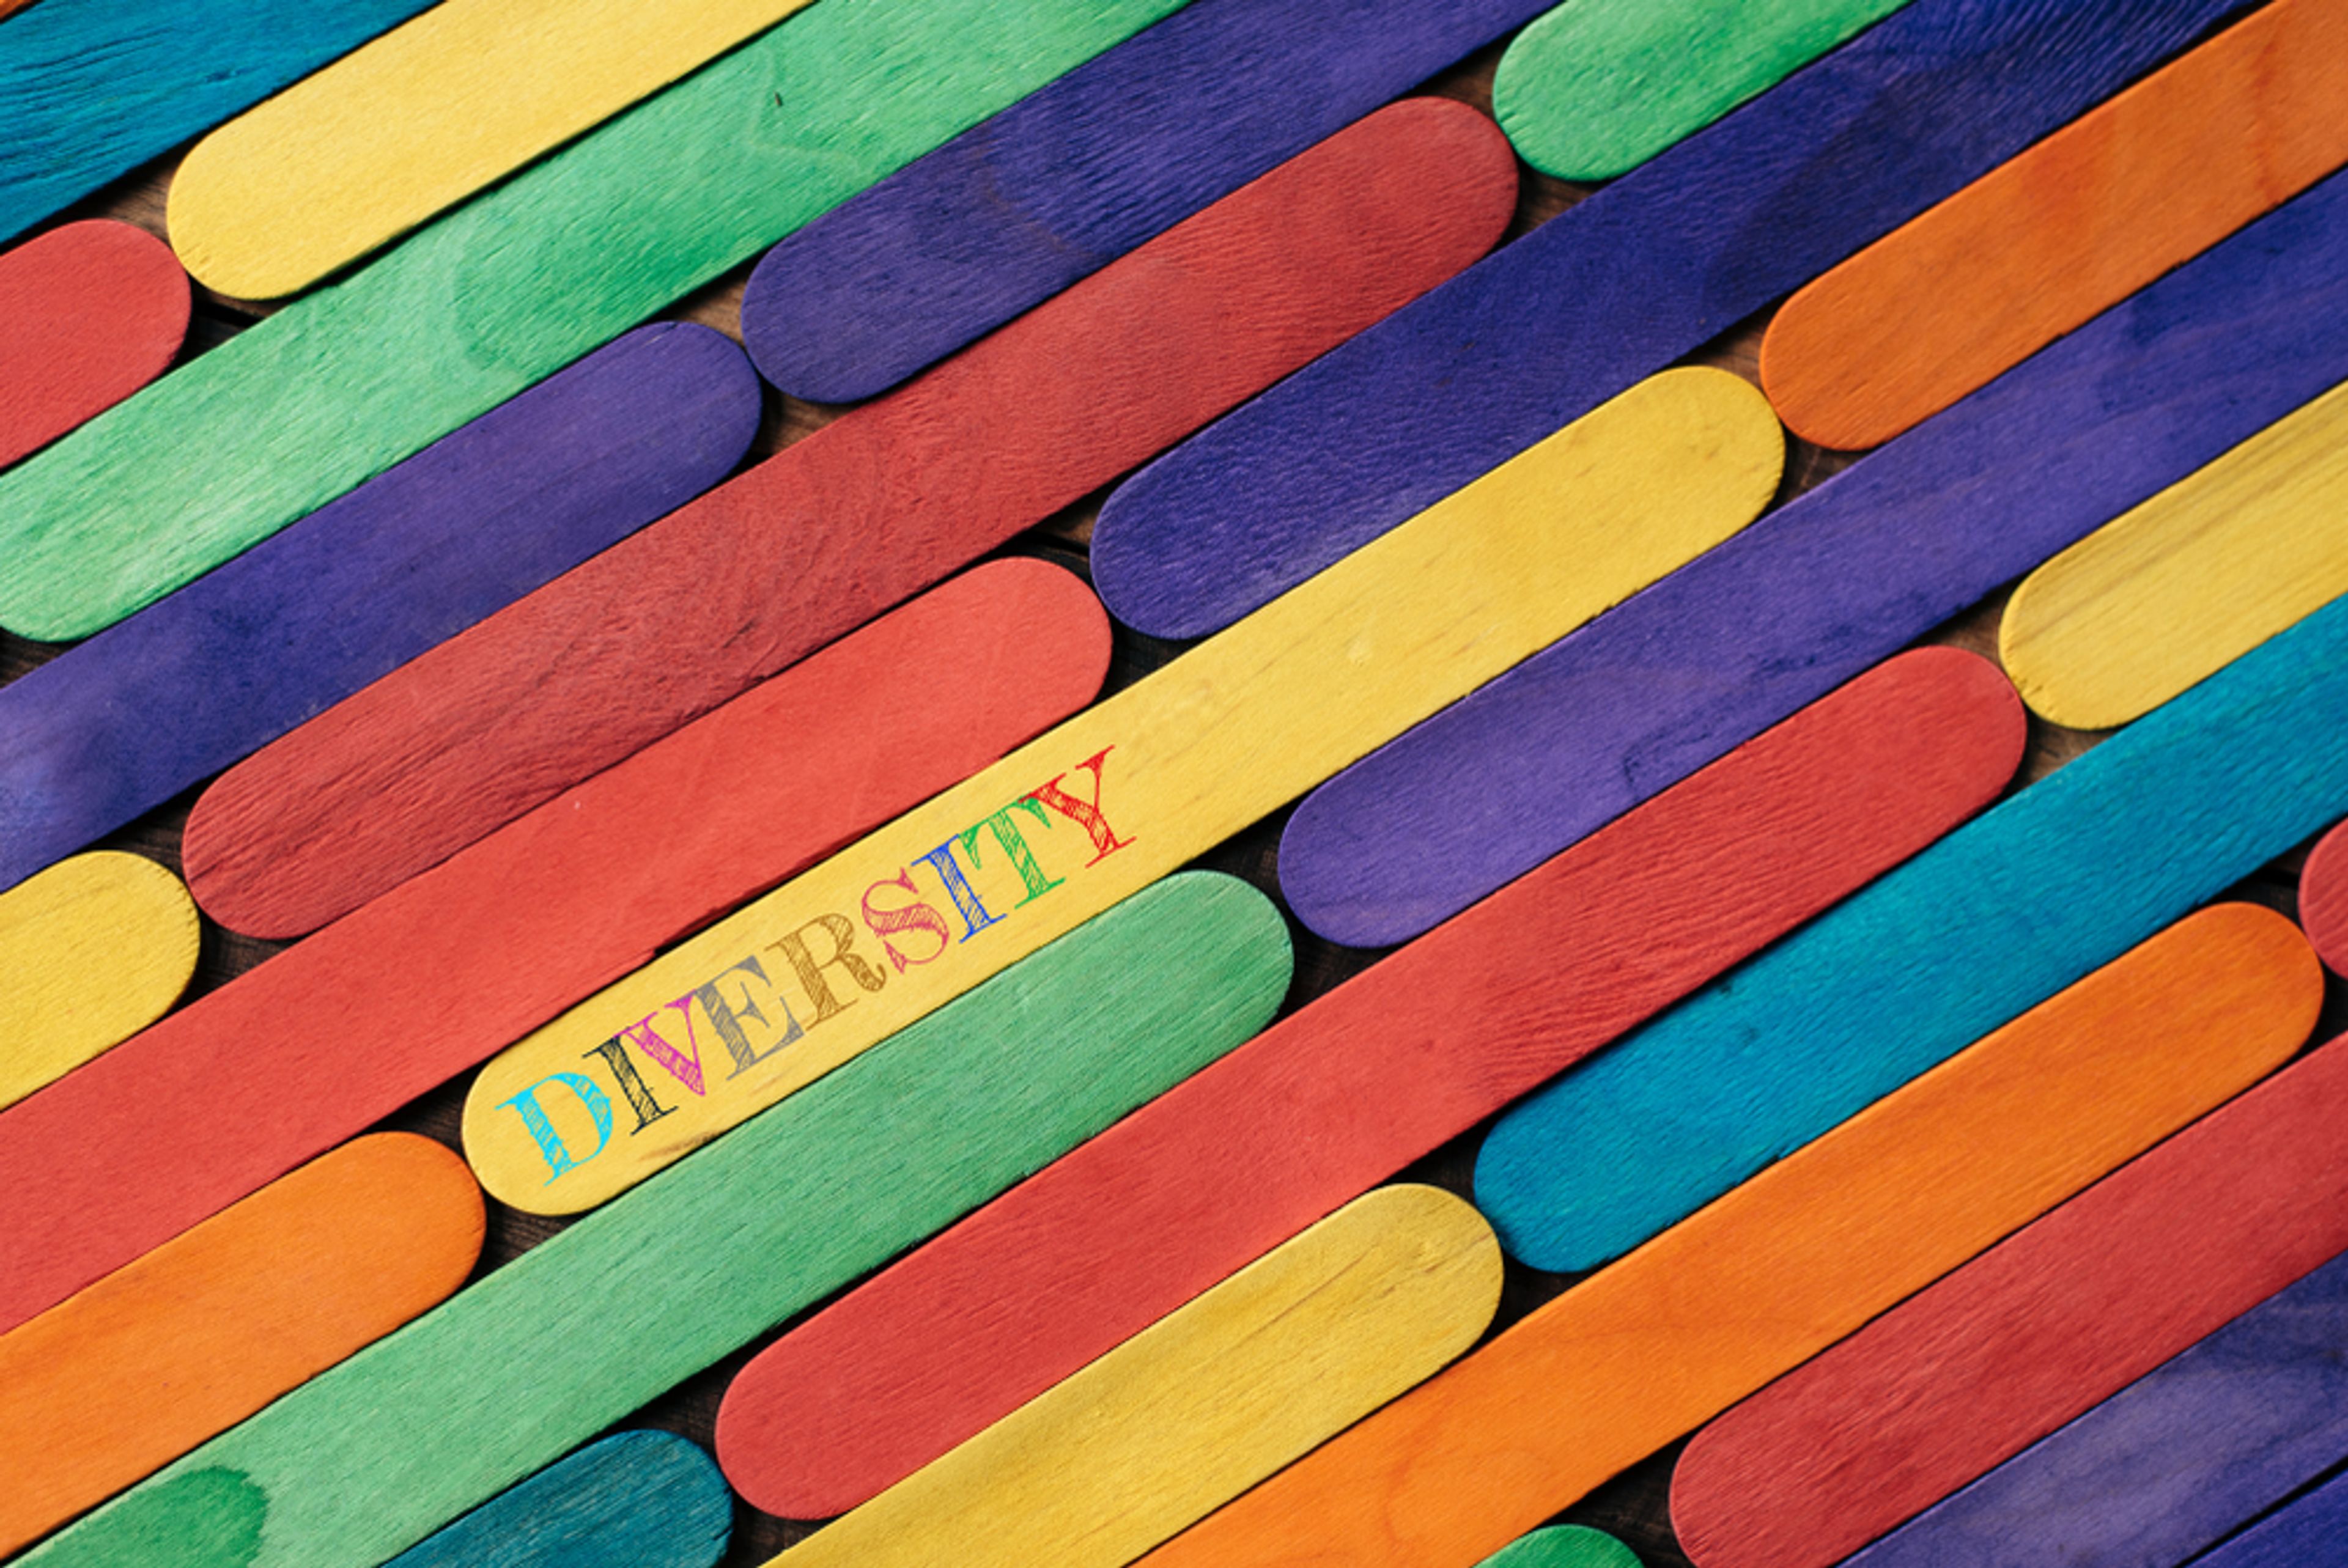 A image of different coloured pieces of wood, with the word 'diversity' printed on one of them